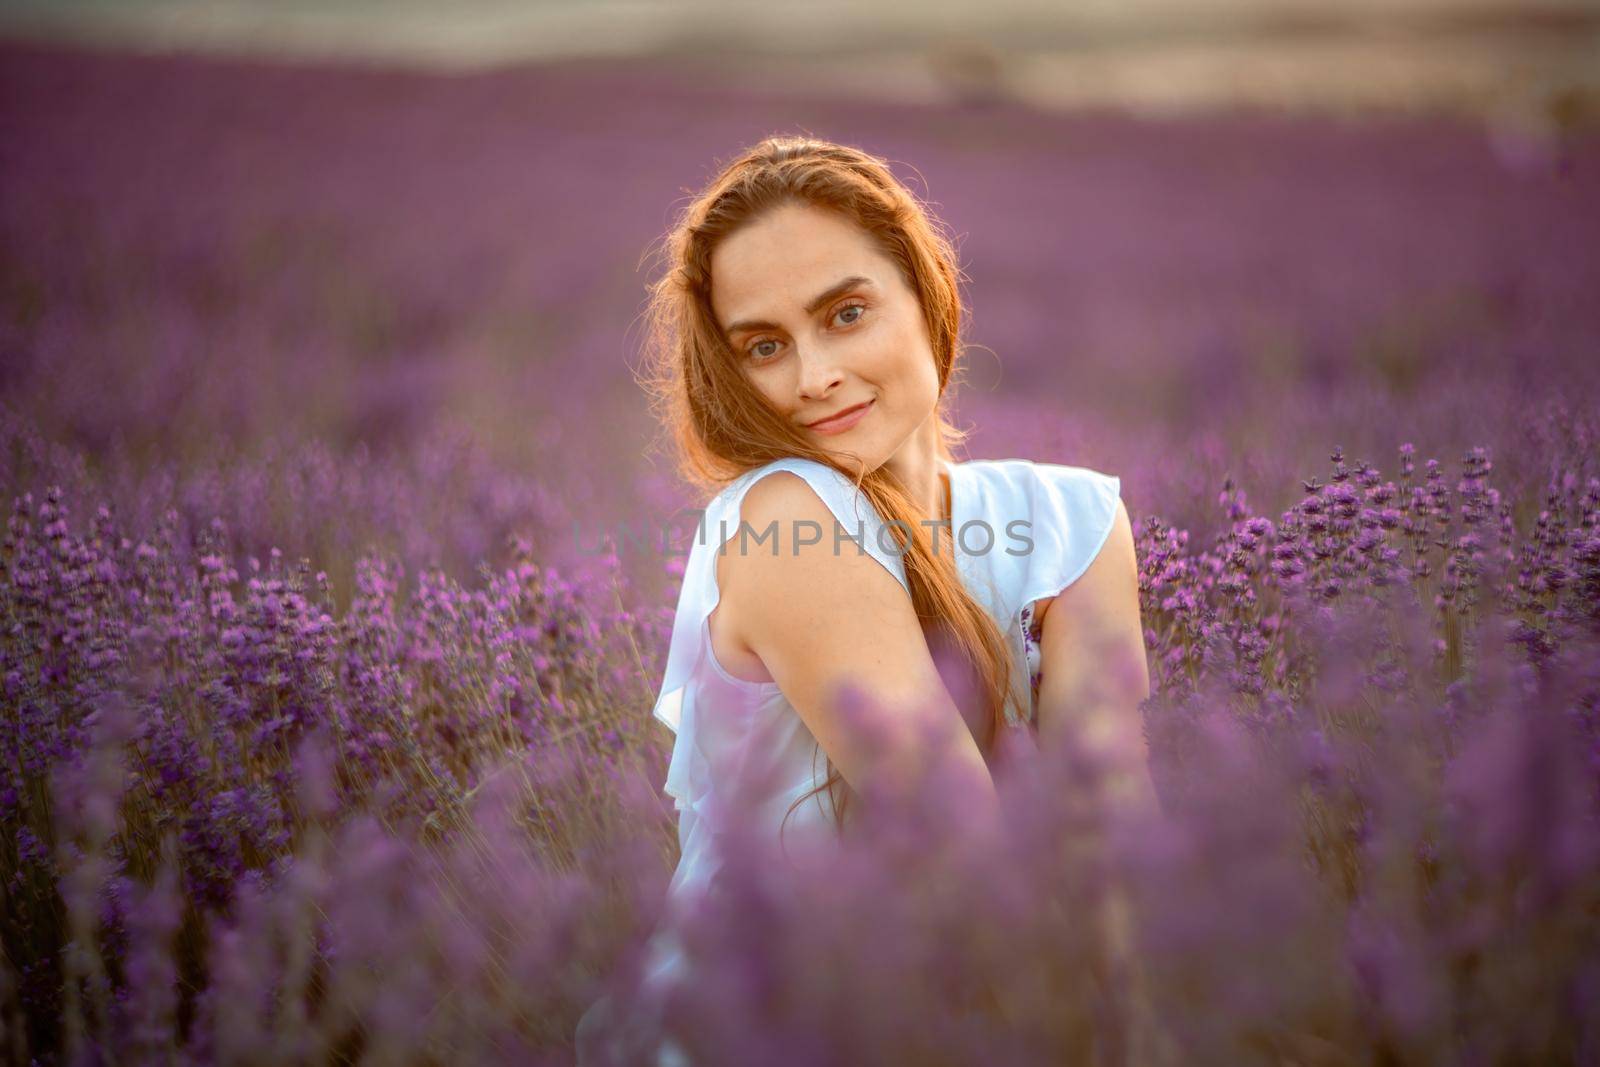 A beautiful girl in a white dress and loose hair on a lavender field. Beautiful woman in a lavender field at sunset. Soft Focus.